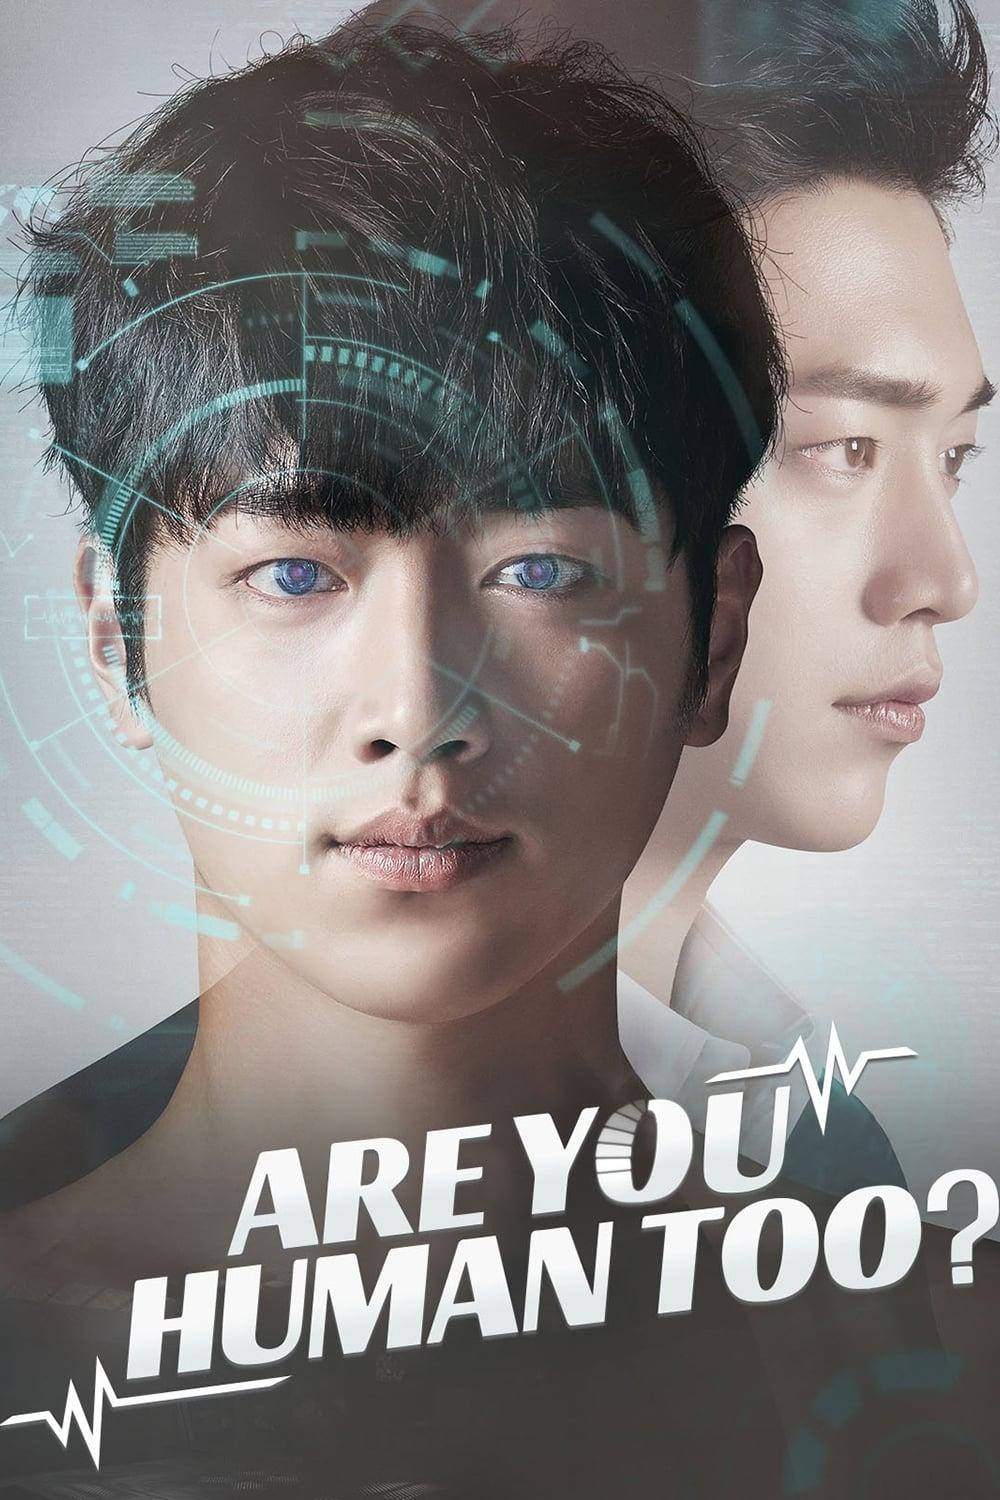 Are You Human? poster